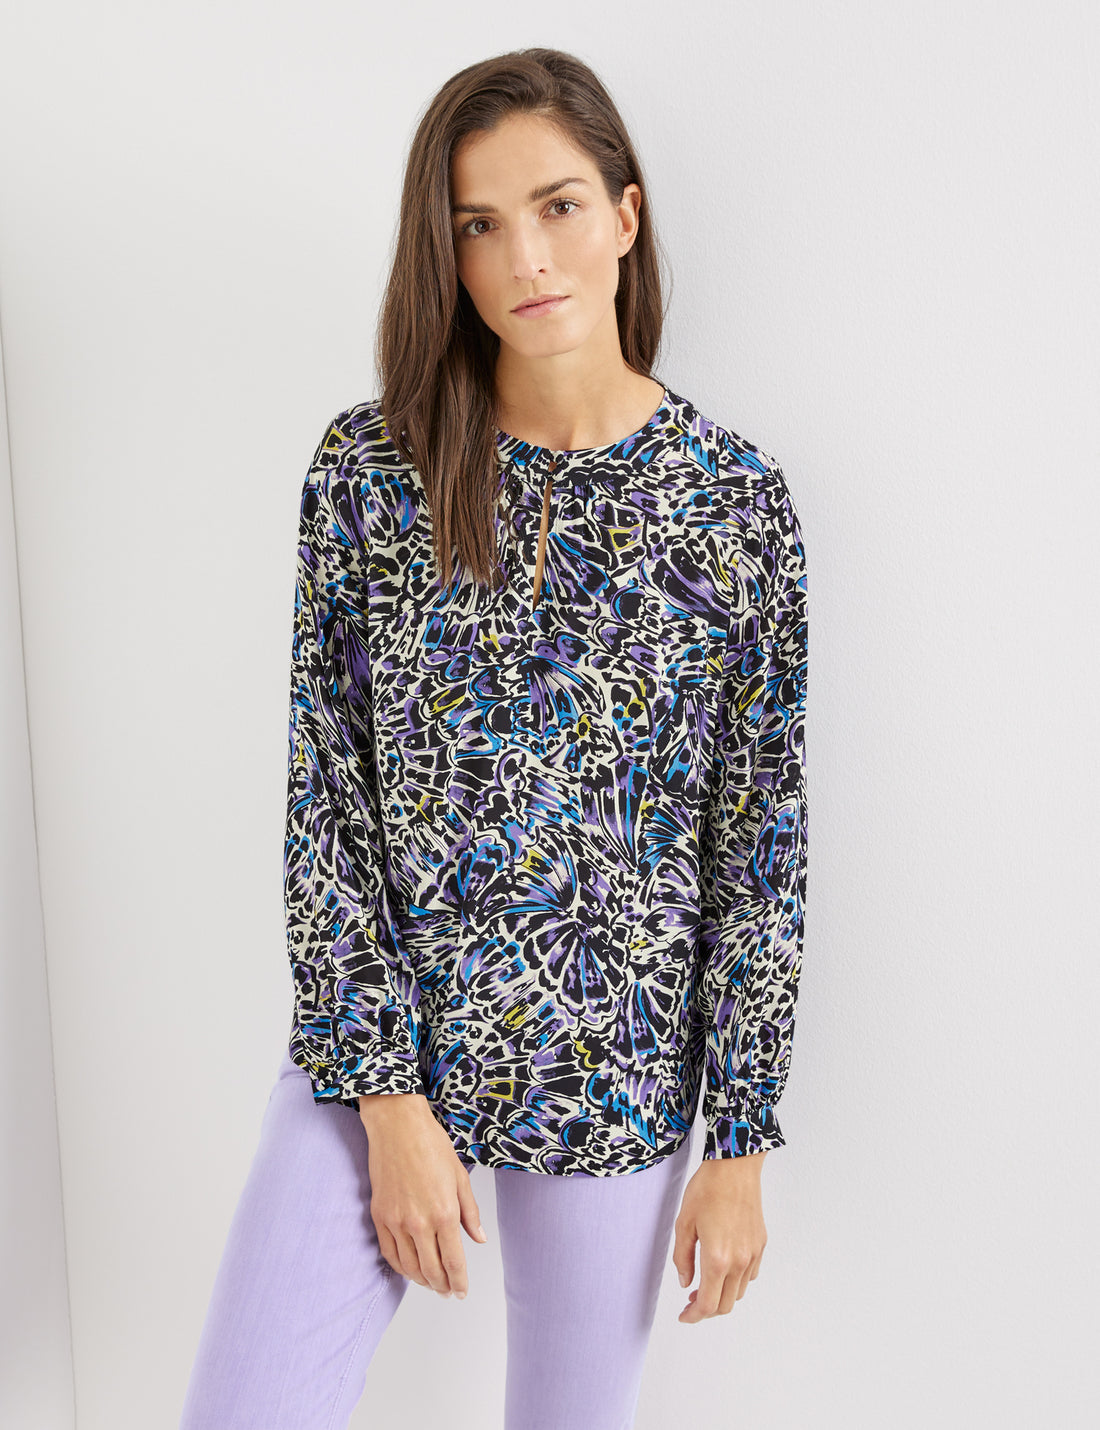 Flowing Blouse With An All-Over Pattern